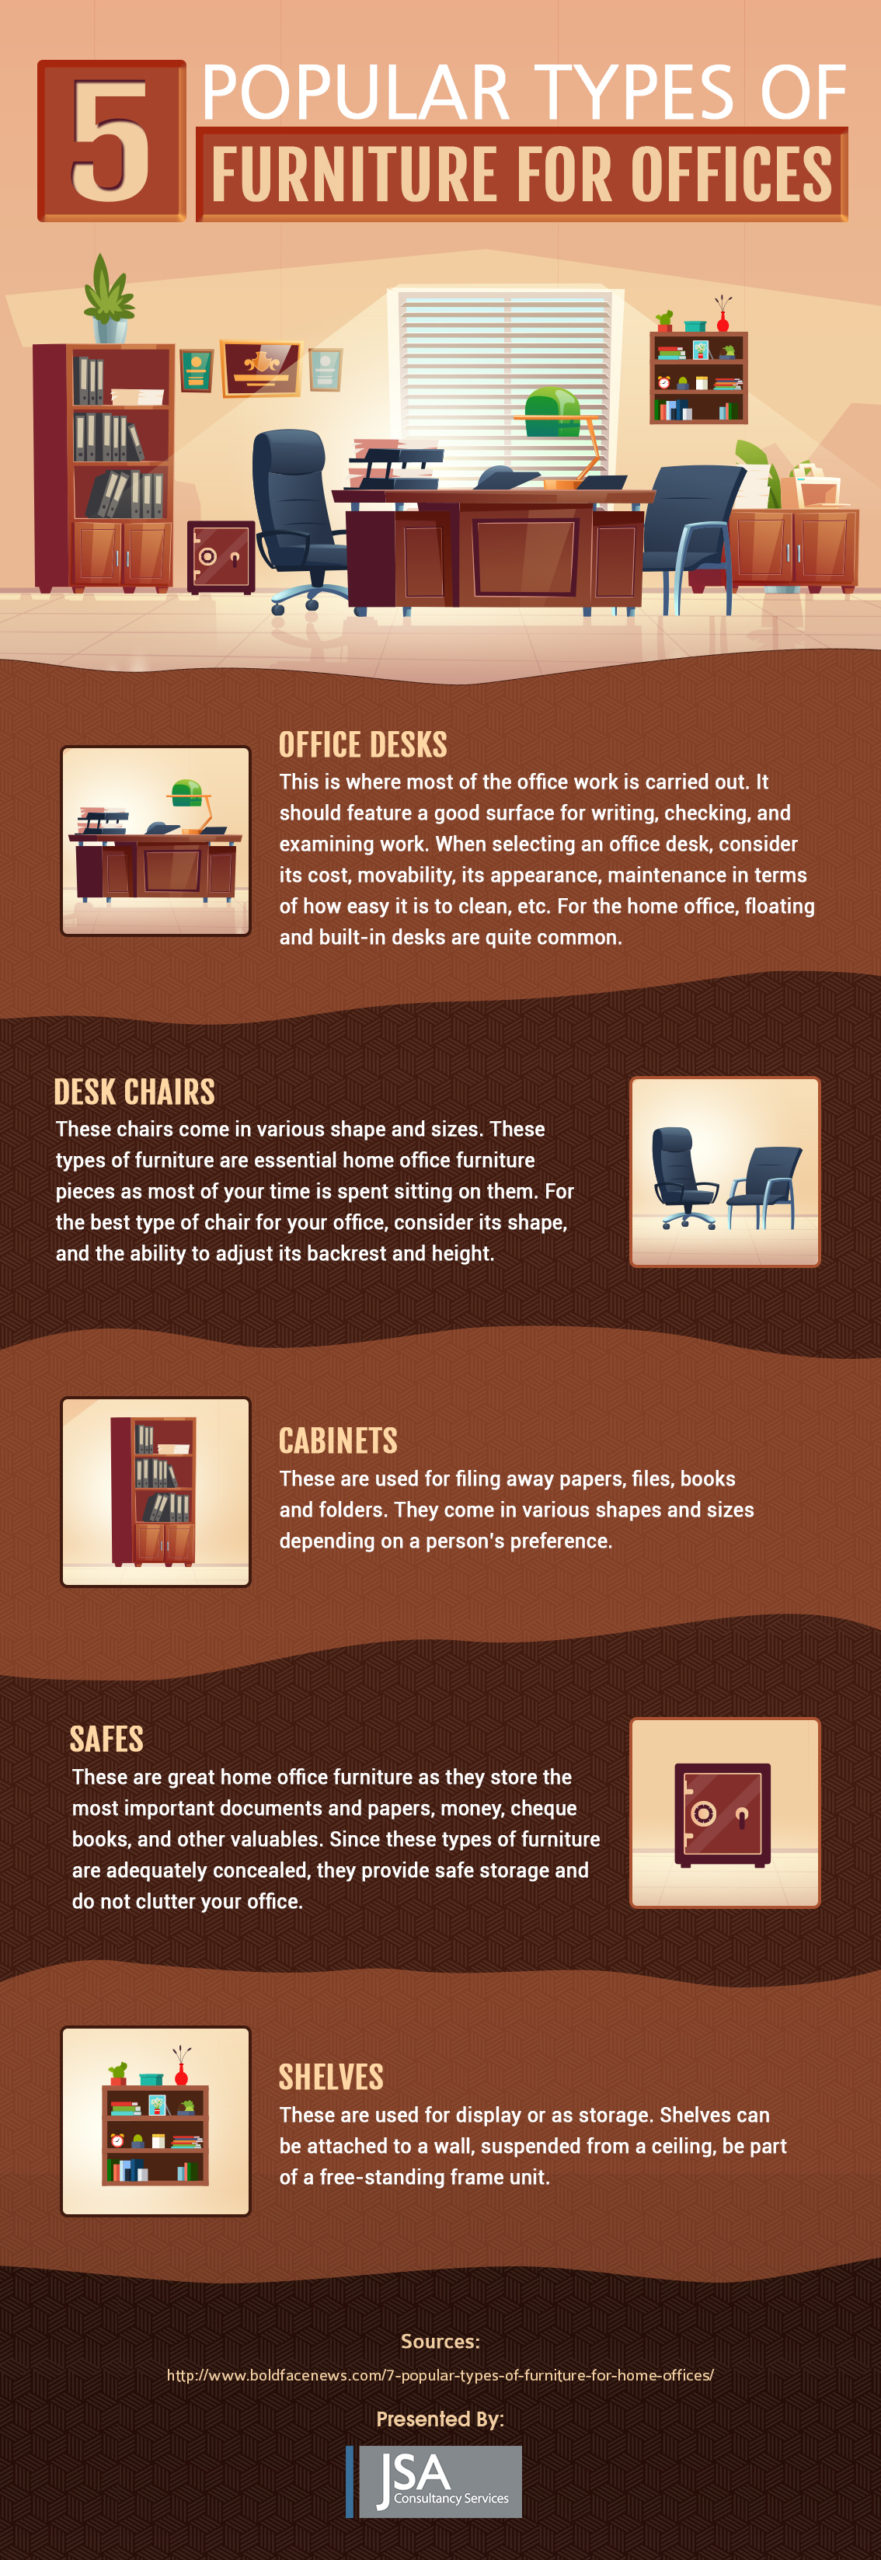 5 POPULAR TYPES OF FURNITURE FOR OFFICES